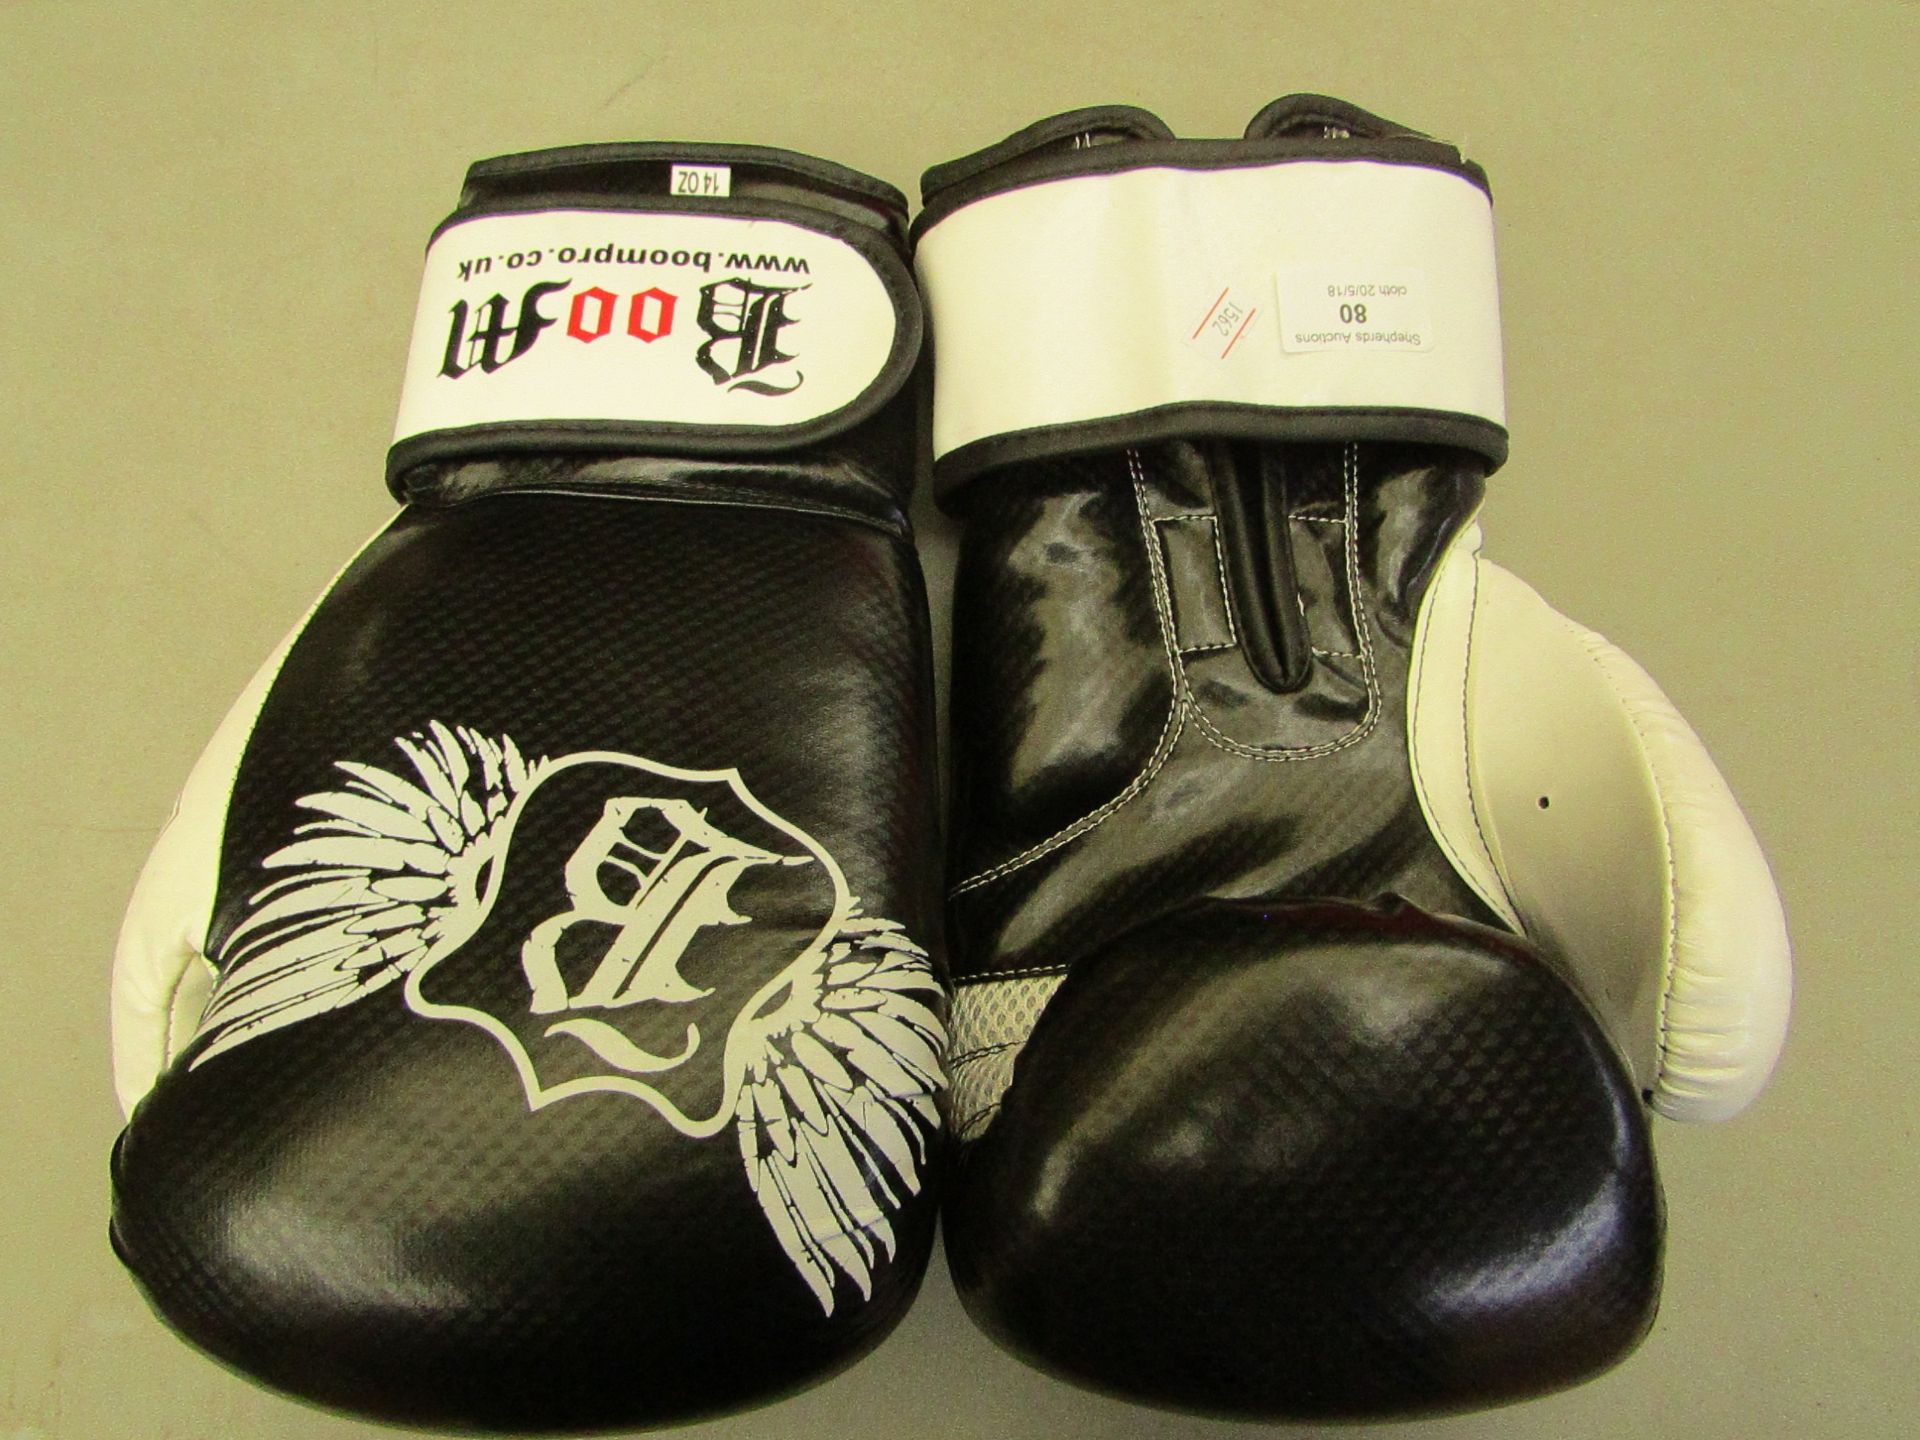 1 X Pair of Boompro boxing gloves 14OZ